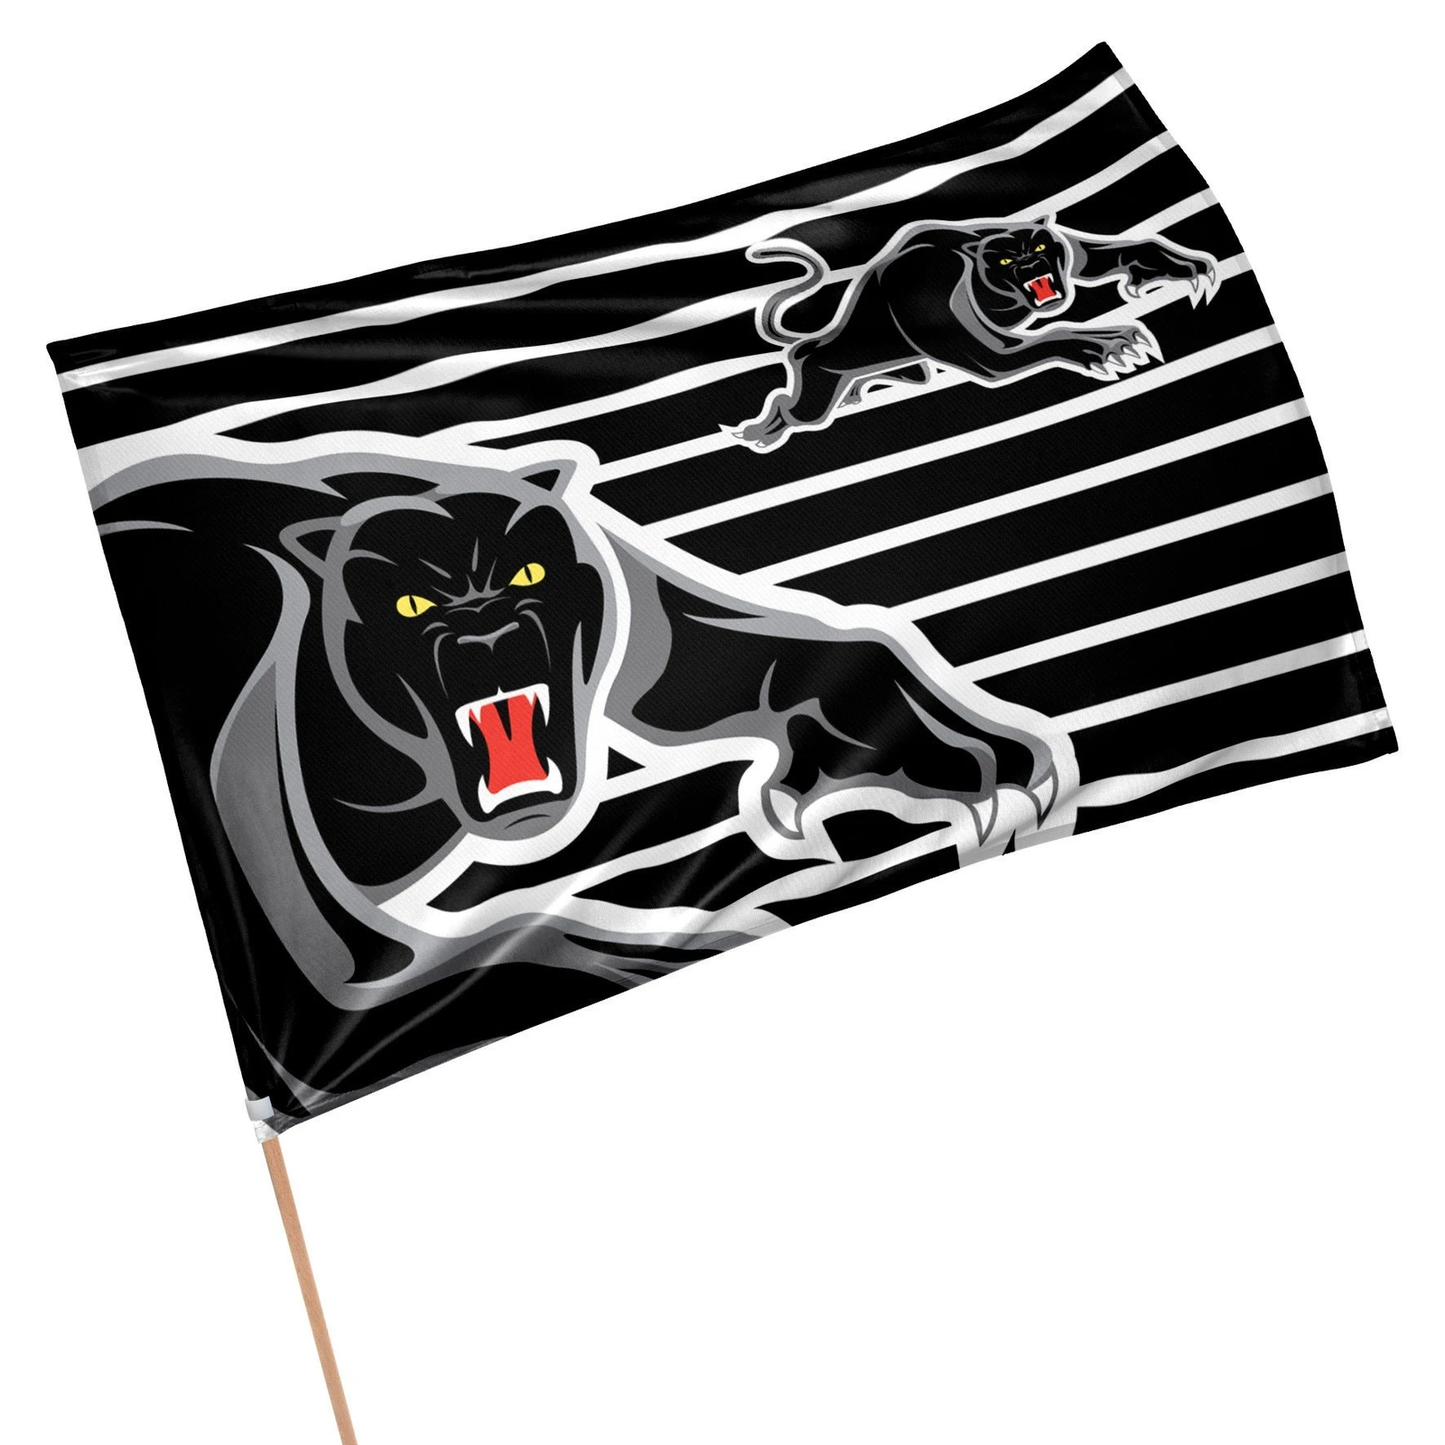 Panthers Game Day Flag (87cm x 58cm)